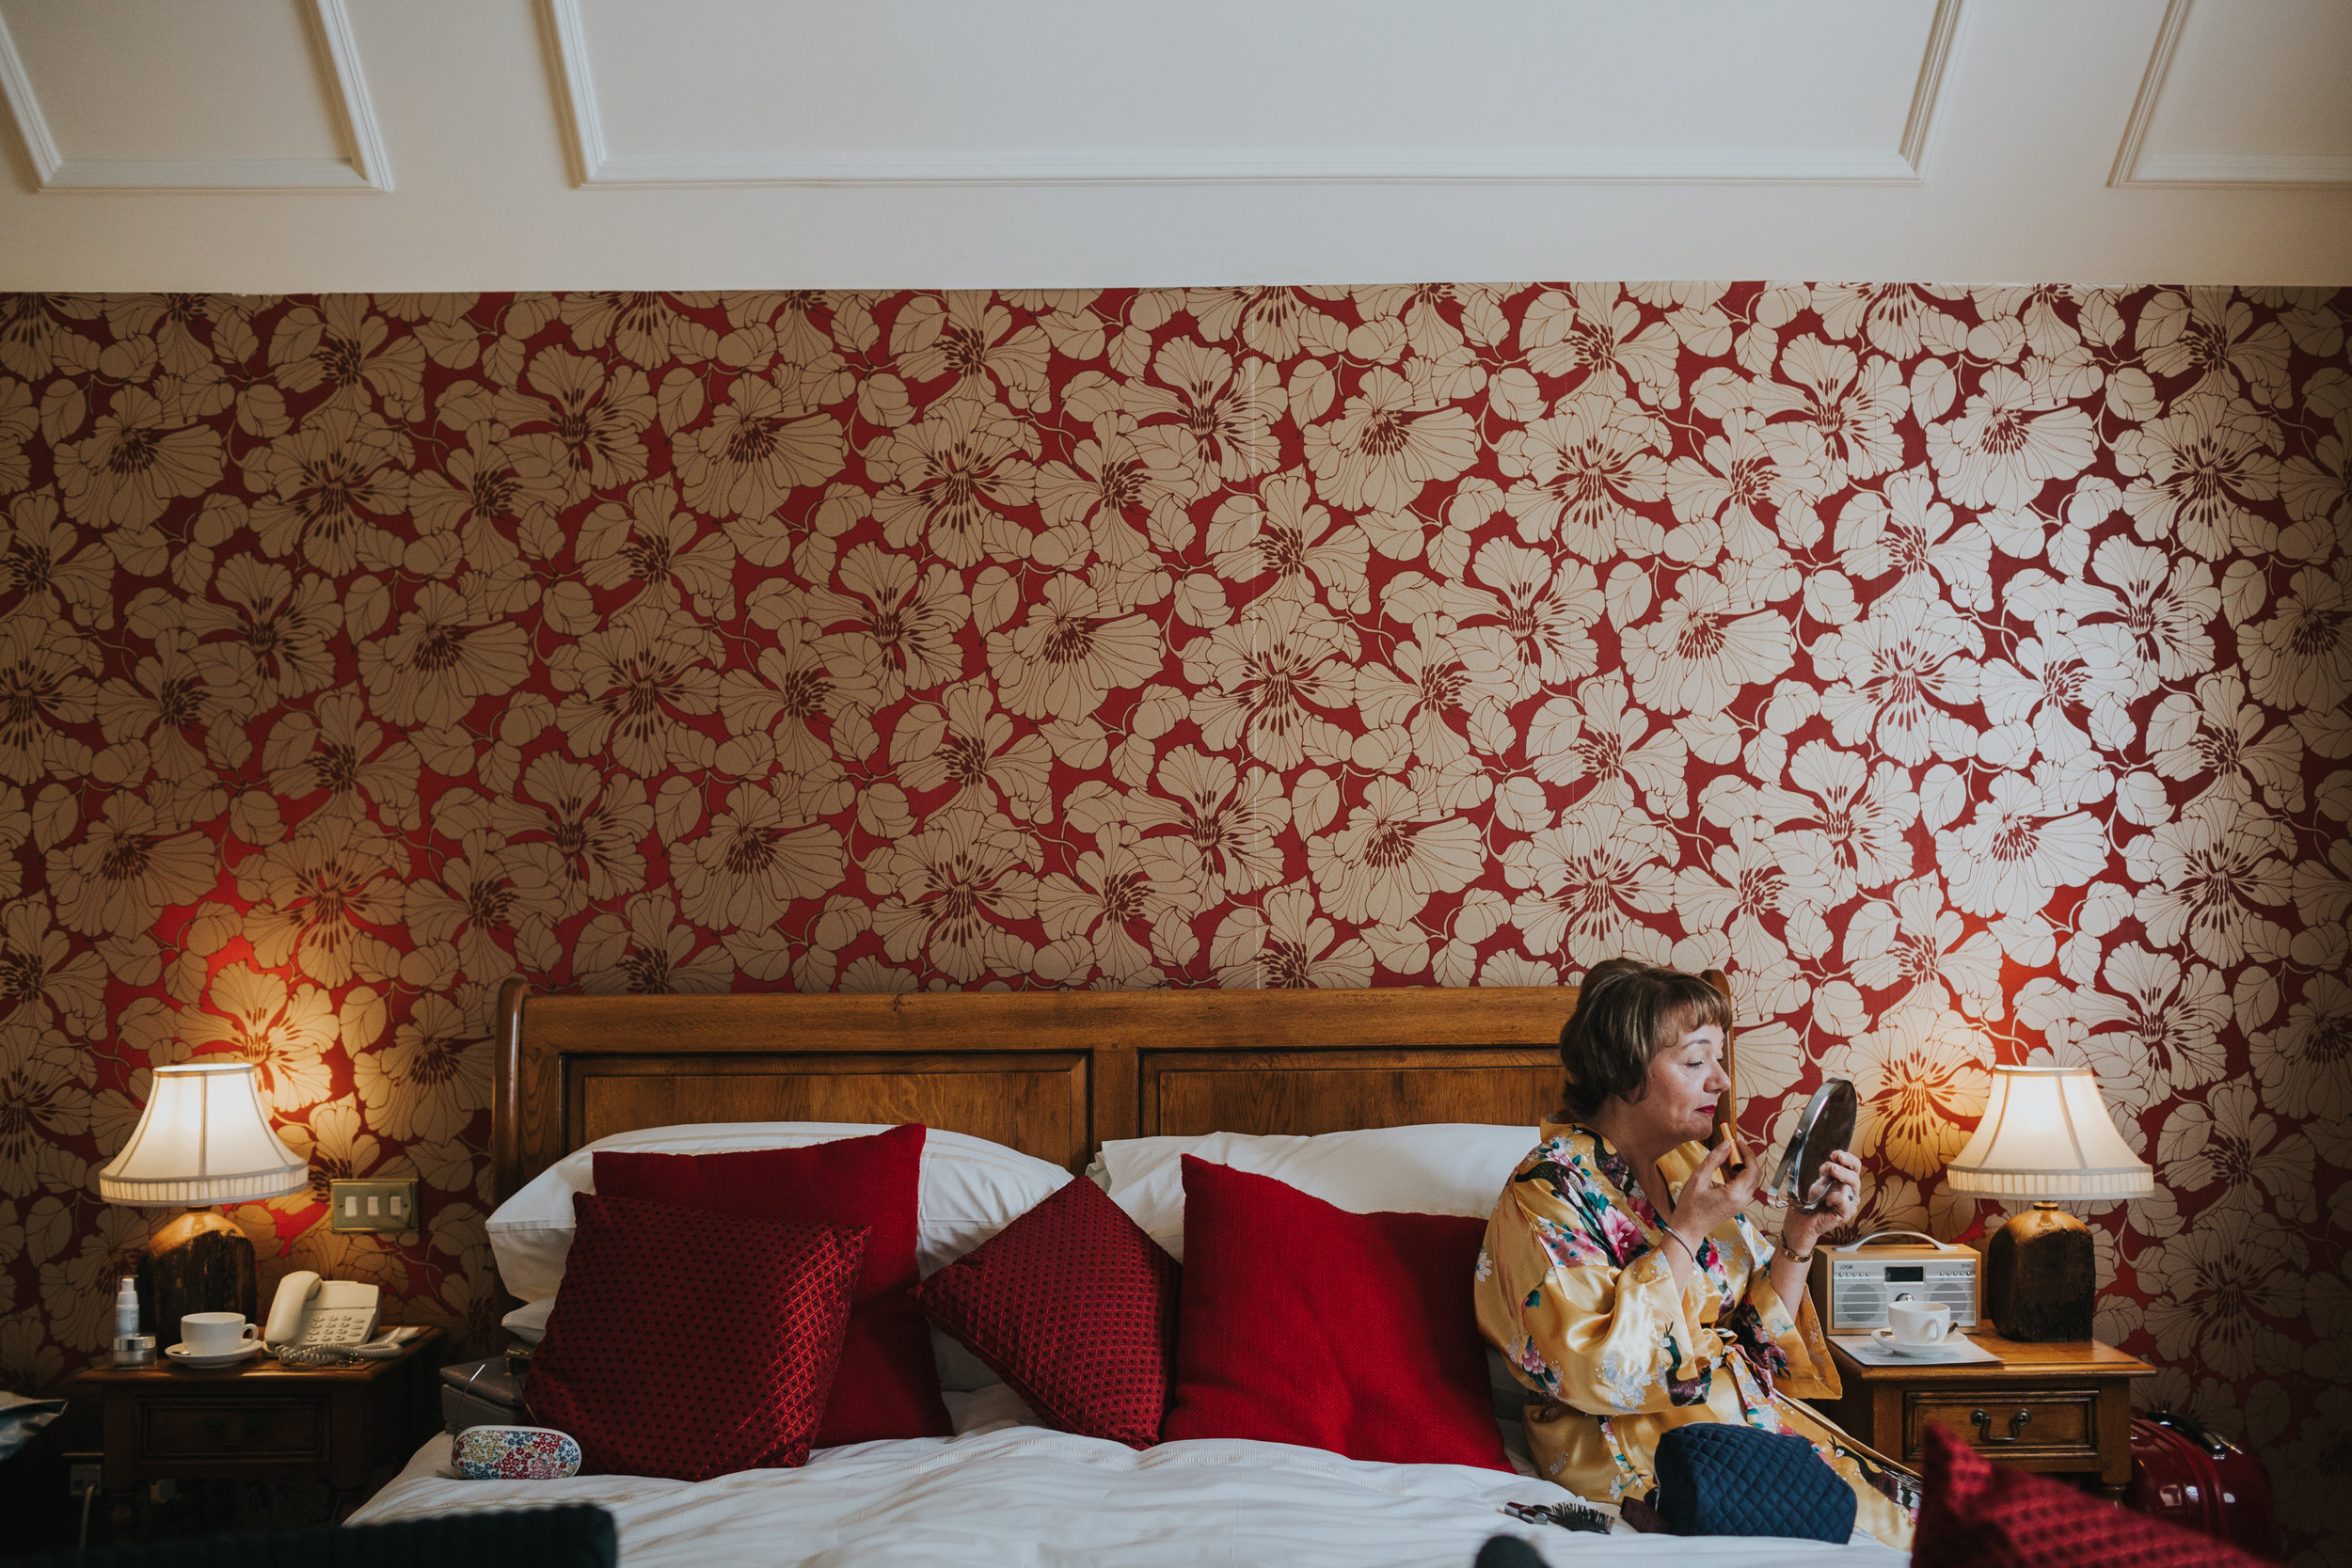 Mother of the bride puts her make up on sitting on the edge of the bed with two identical lampshades either side of it and very jazzy wall paper behind her.